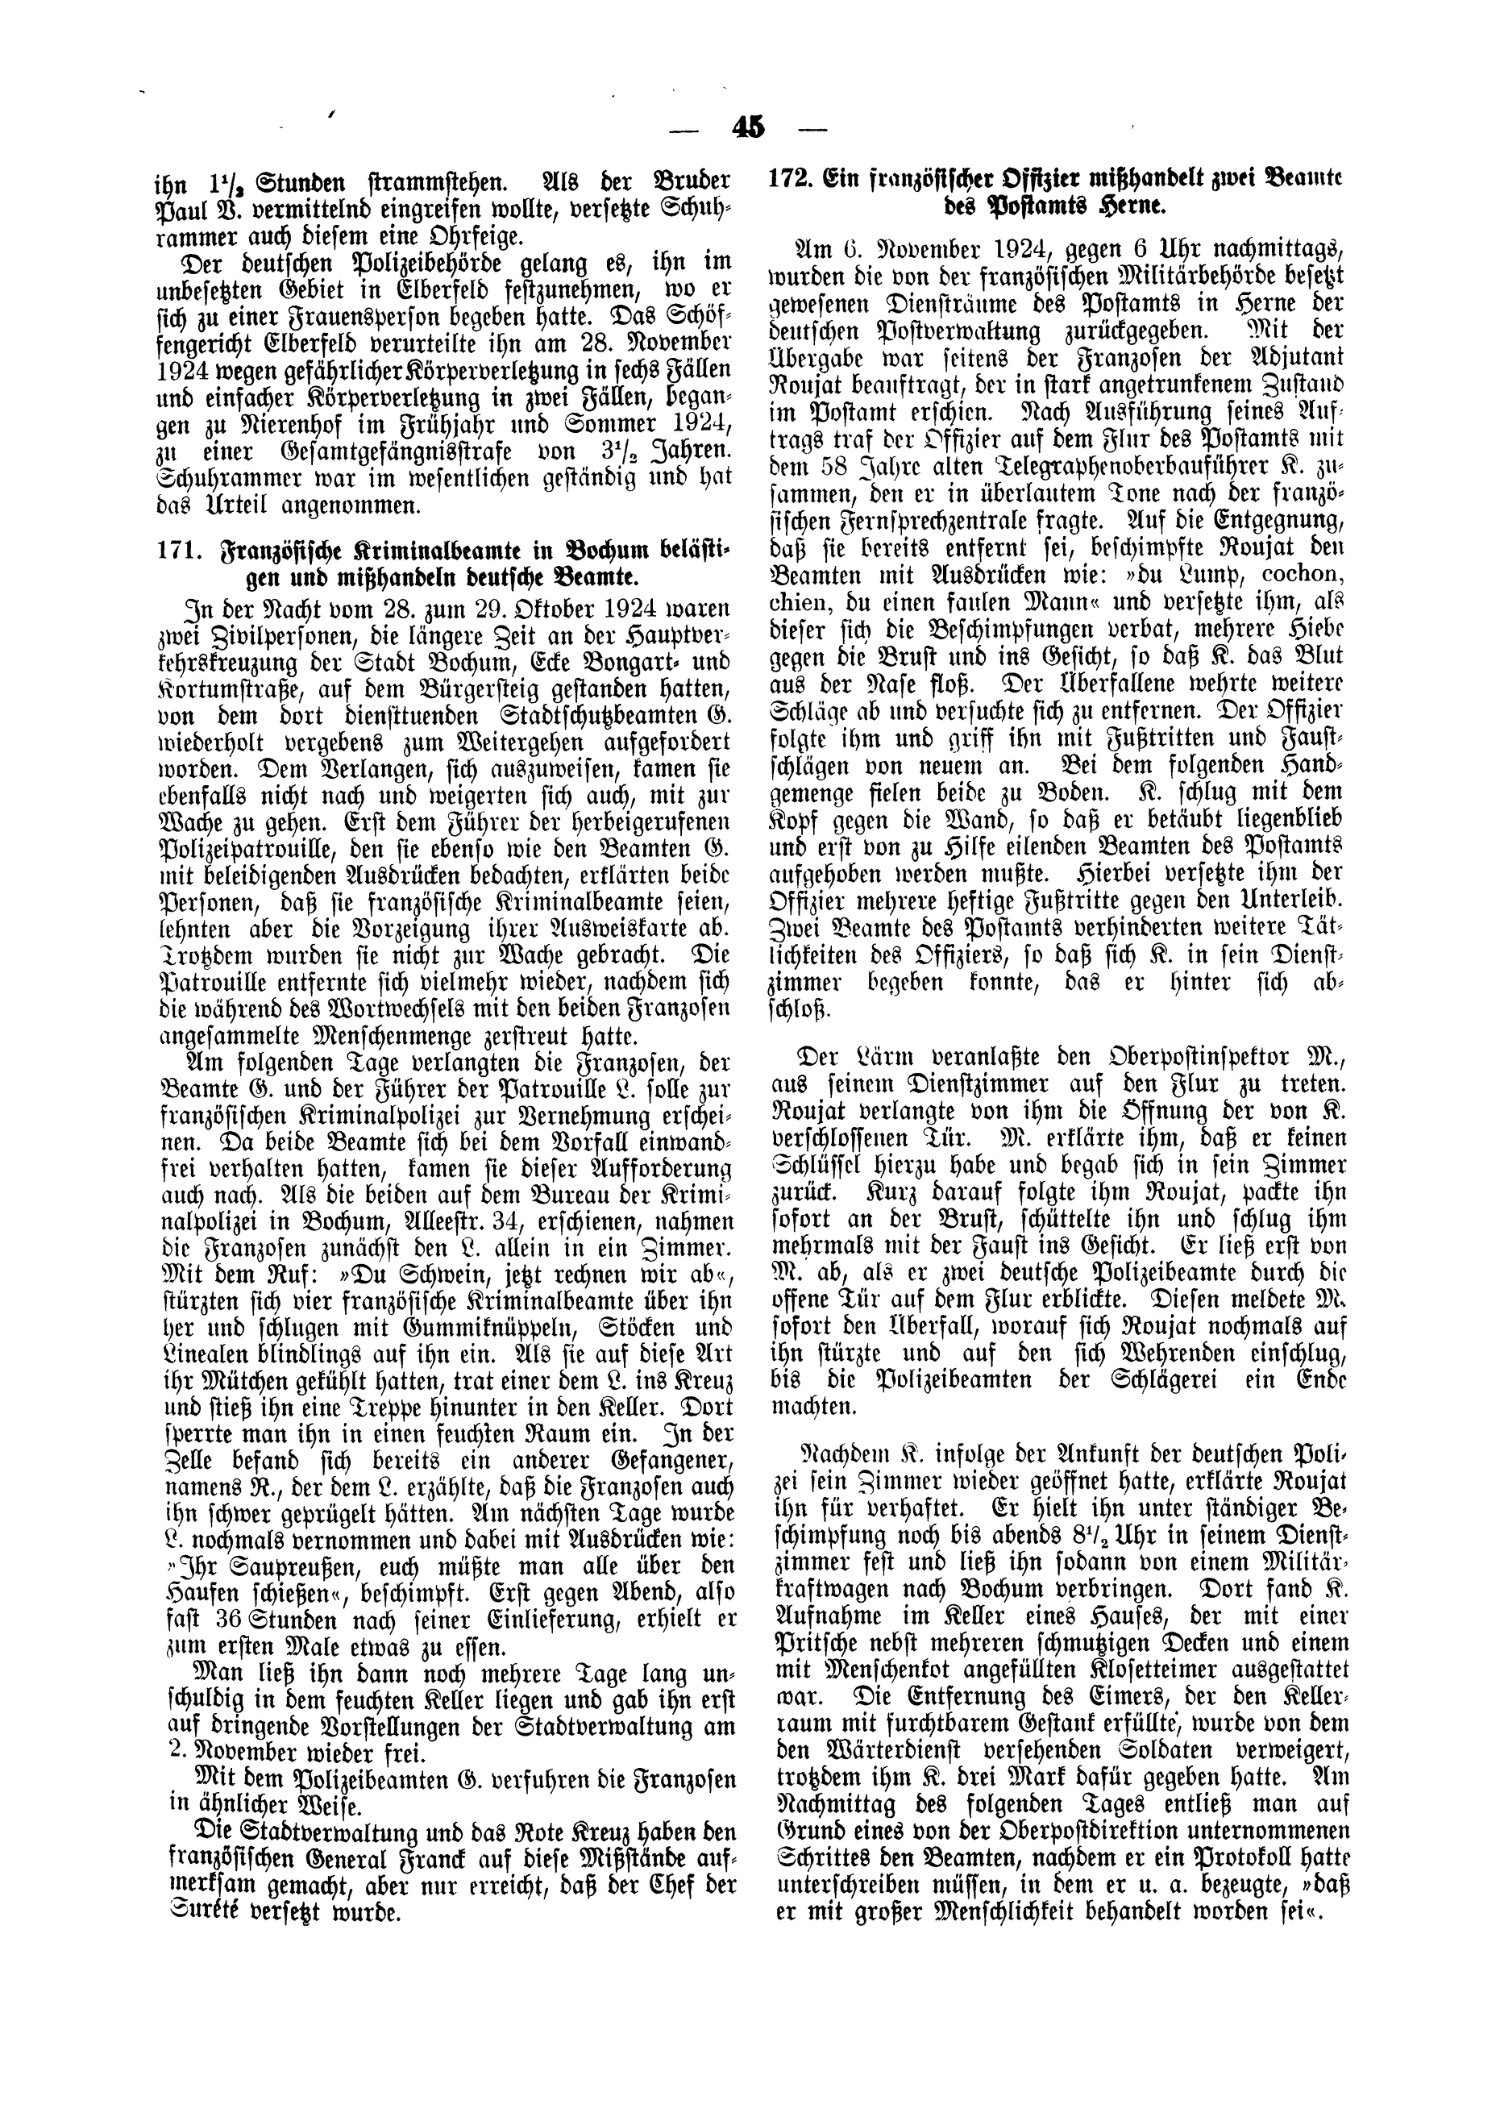 Scan of page 45